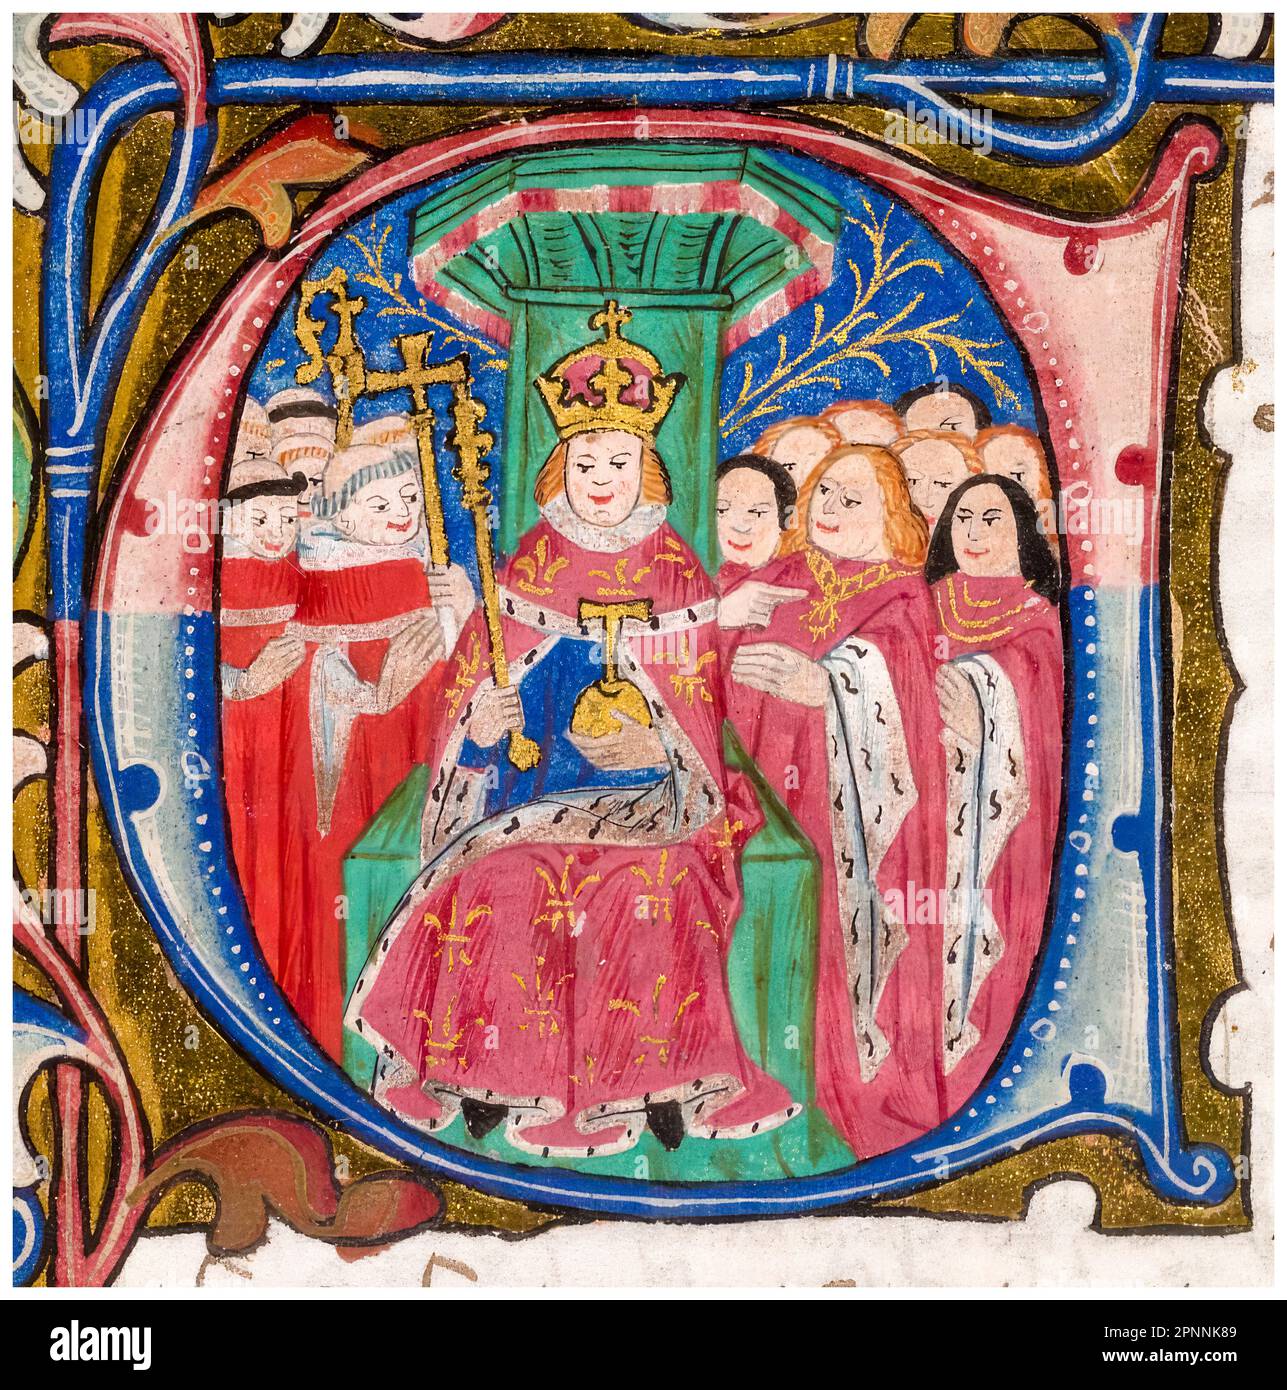 Edward III of England (1312-1377), King of England (1327-1377), enthroned wearing a crown, ermine robe and holding an orb and sceptre, illustrated in an historiated initial C, miniature illuminated manuscript portrait painting by The Placentius Master, 1488-1489 Stock Photo